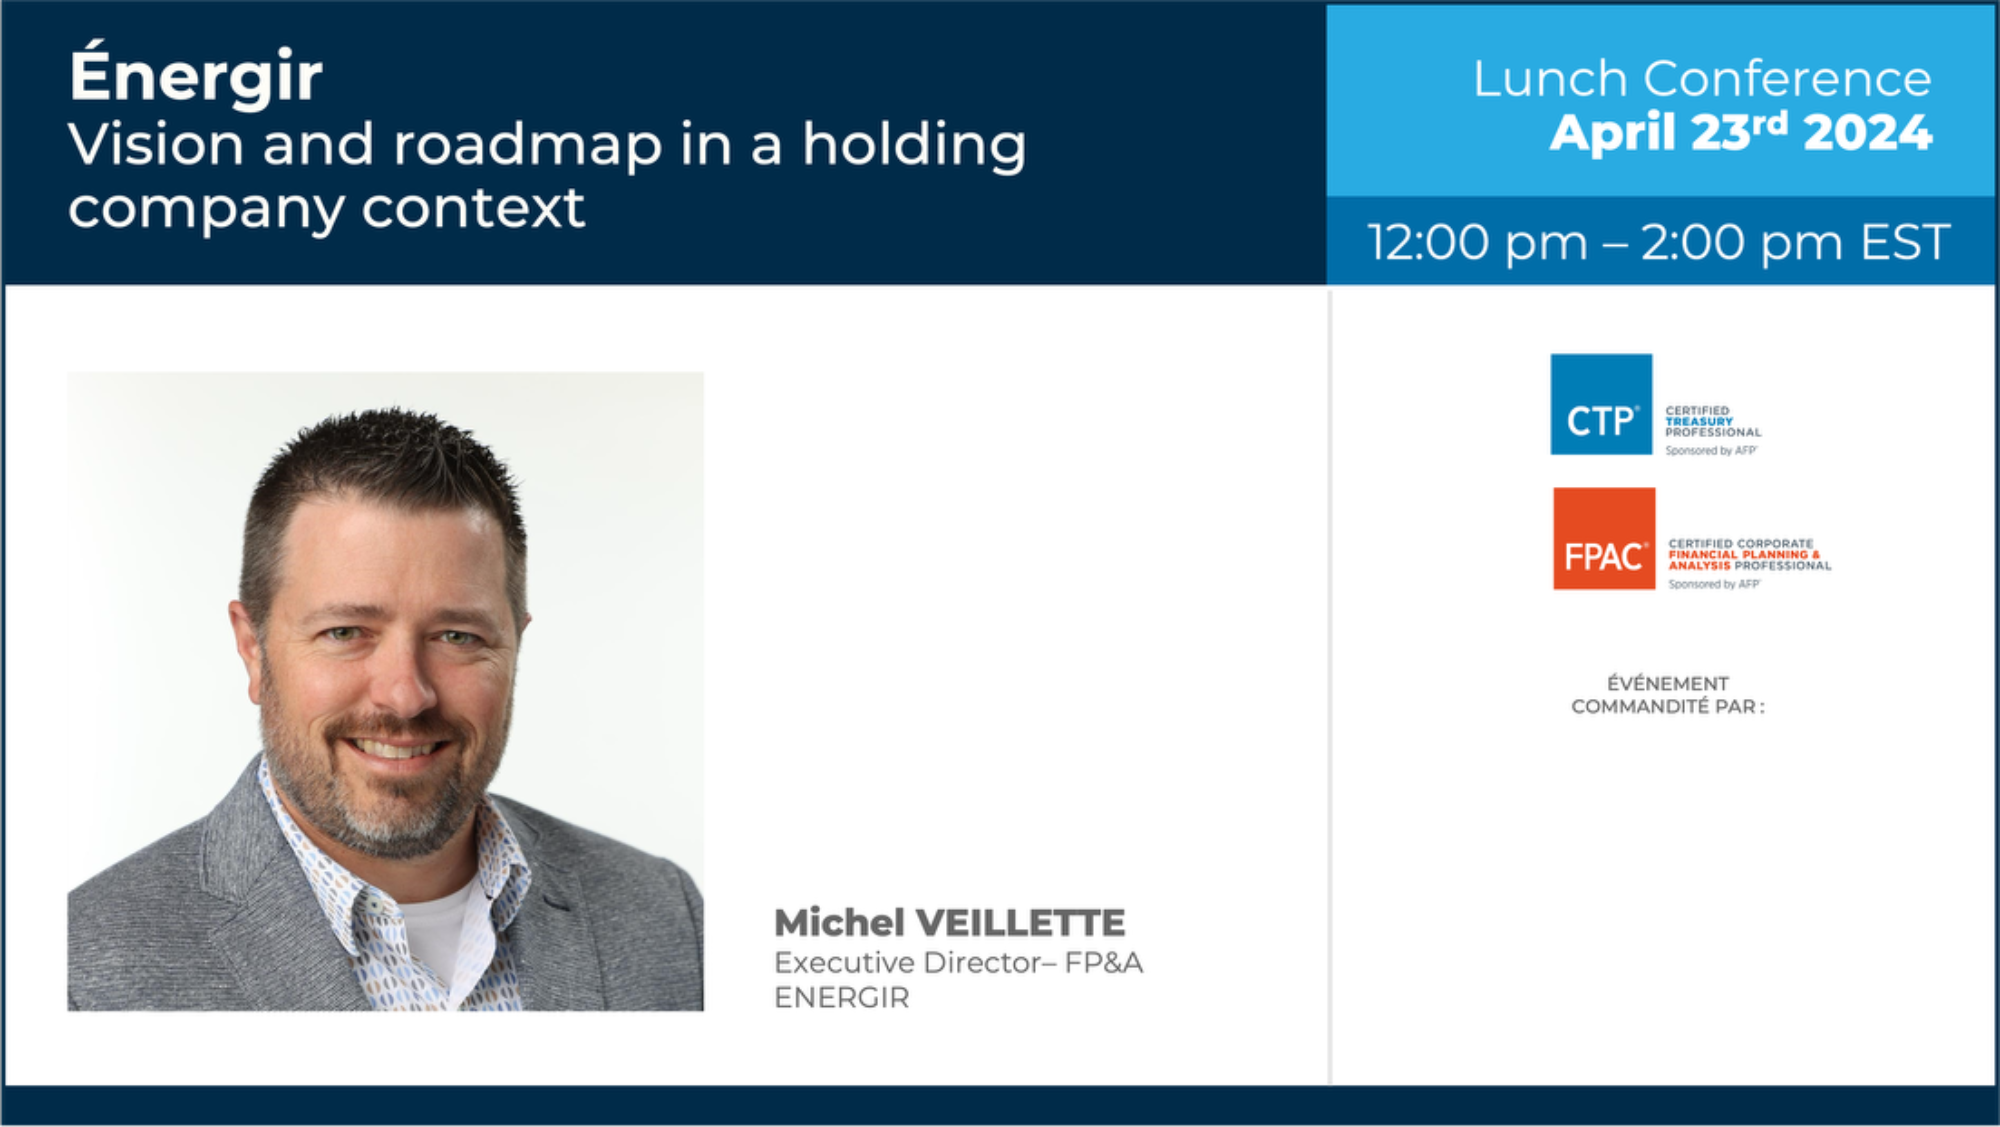 Lunch Conference - FP&A - Vision and roadmap in a holding company context